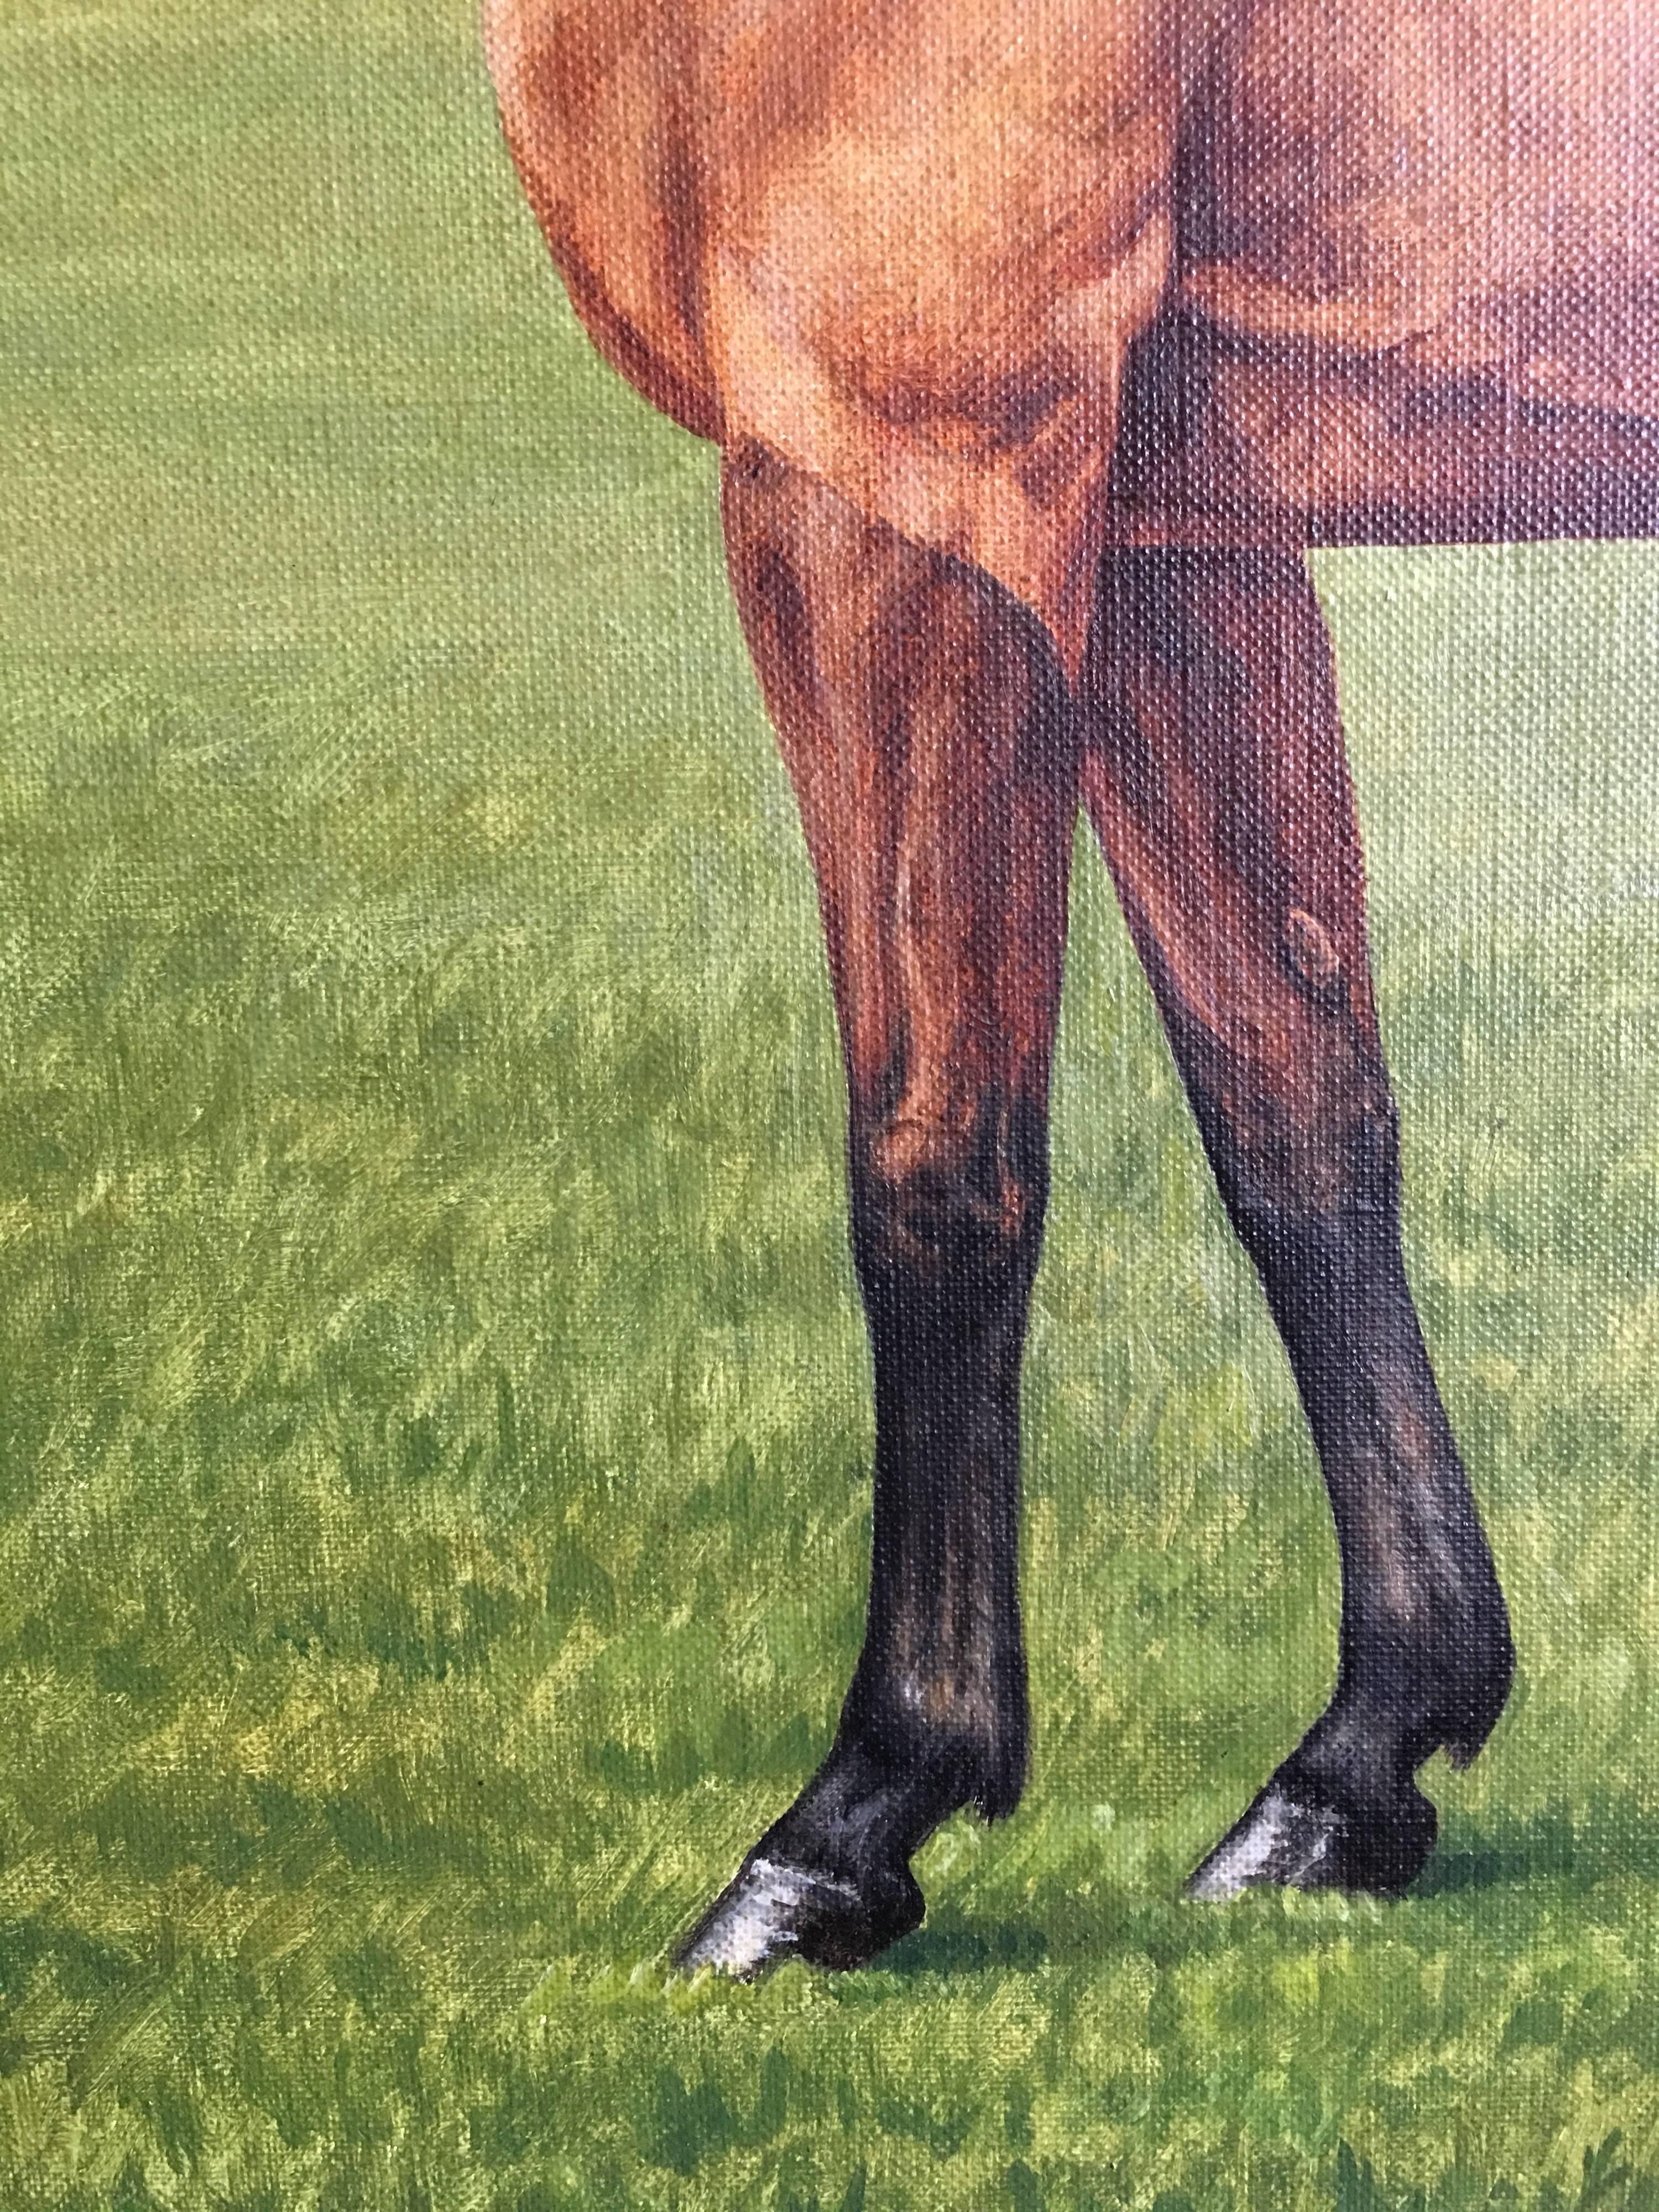 Portrait of a Thoroughbred Horse, Gay Trip, Oil Painting 
By British artist, W.W.Rouch, 21st Century
Signed by the artist on the lower right hand corner
Oil painting on canvas, framed
Frame size: 22.5 x 28.5 inches

Superb portrait of a thoroughbred